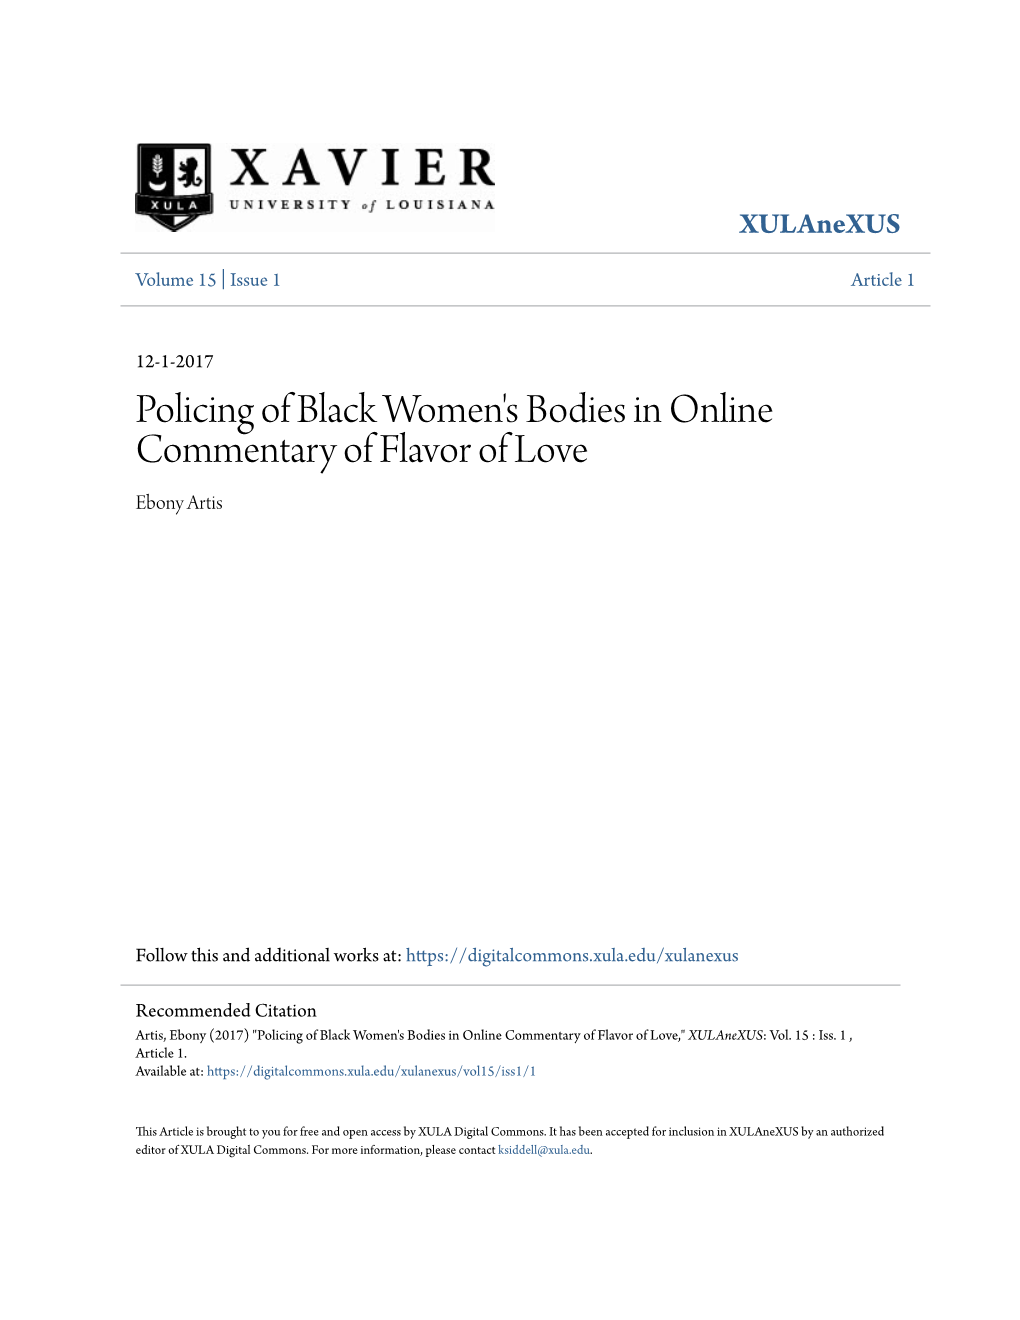 Policing of Black Women's Bodies in Online Commentary of Flavor of Love Ebony Artis